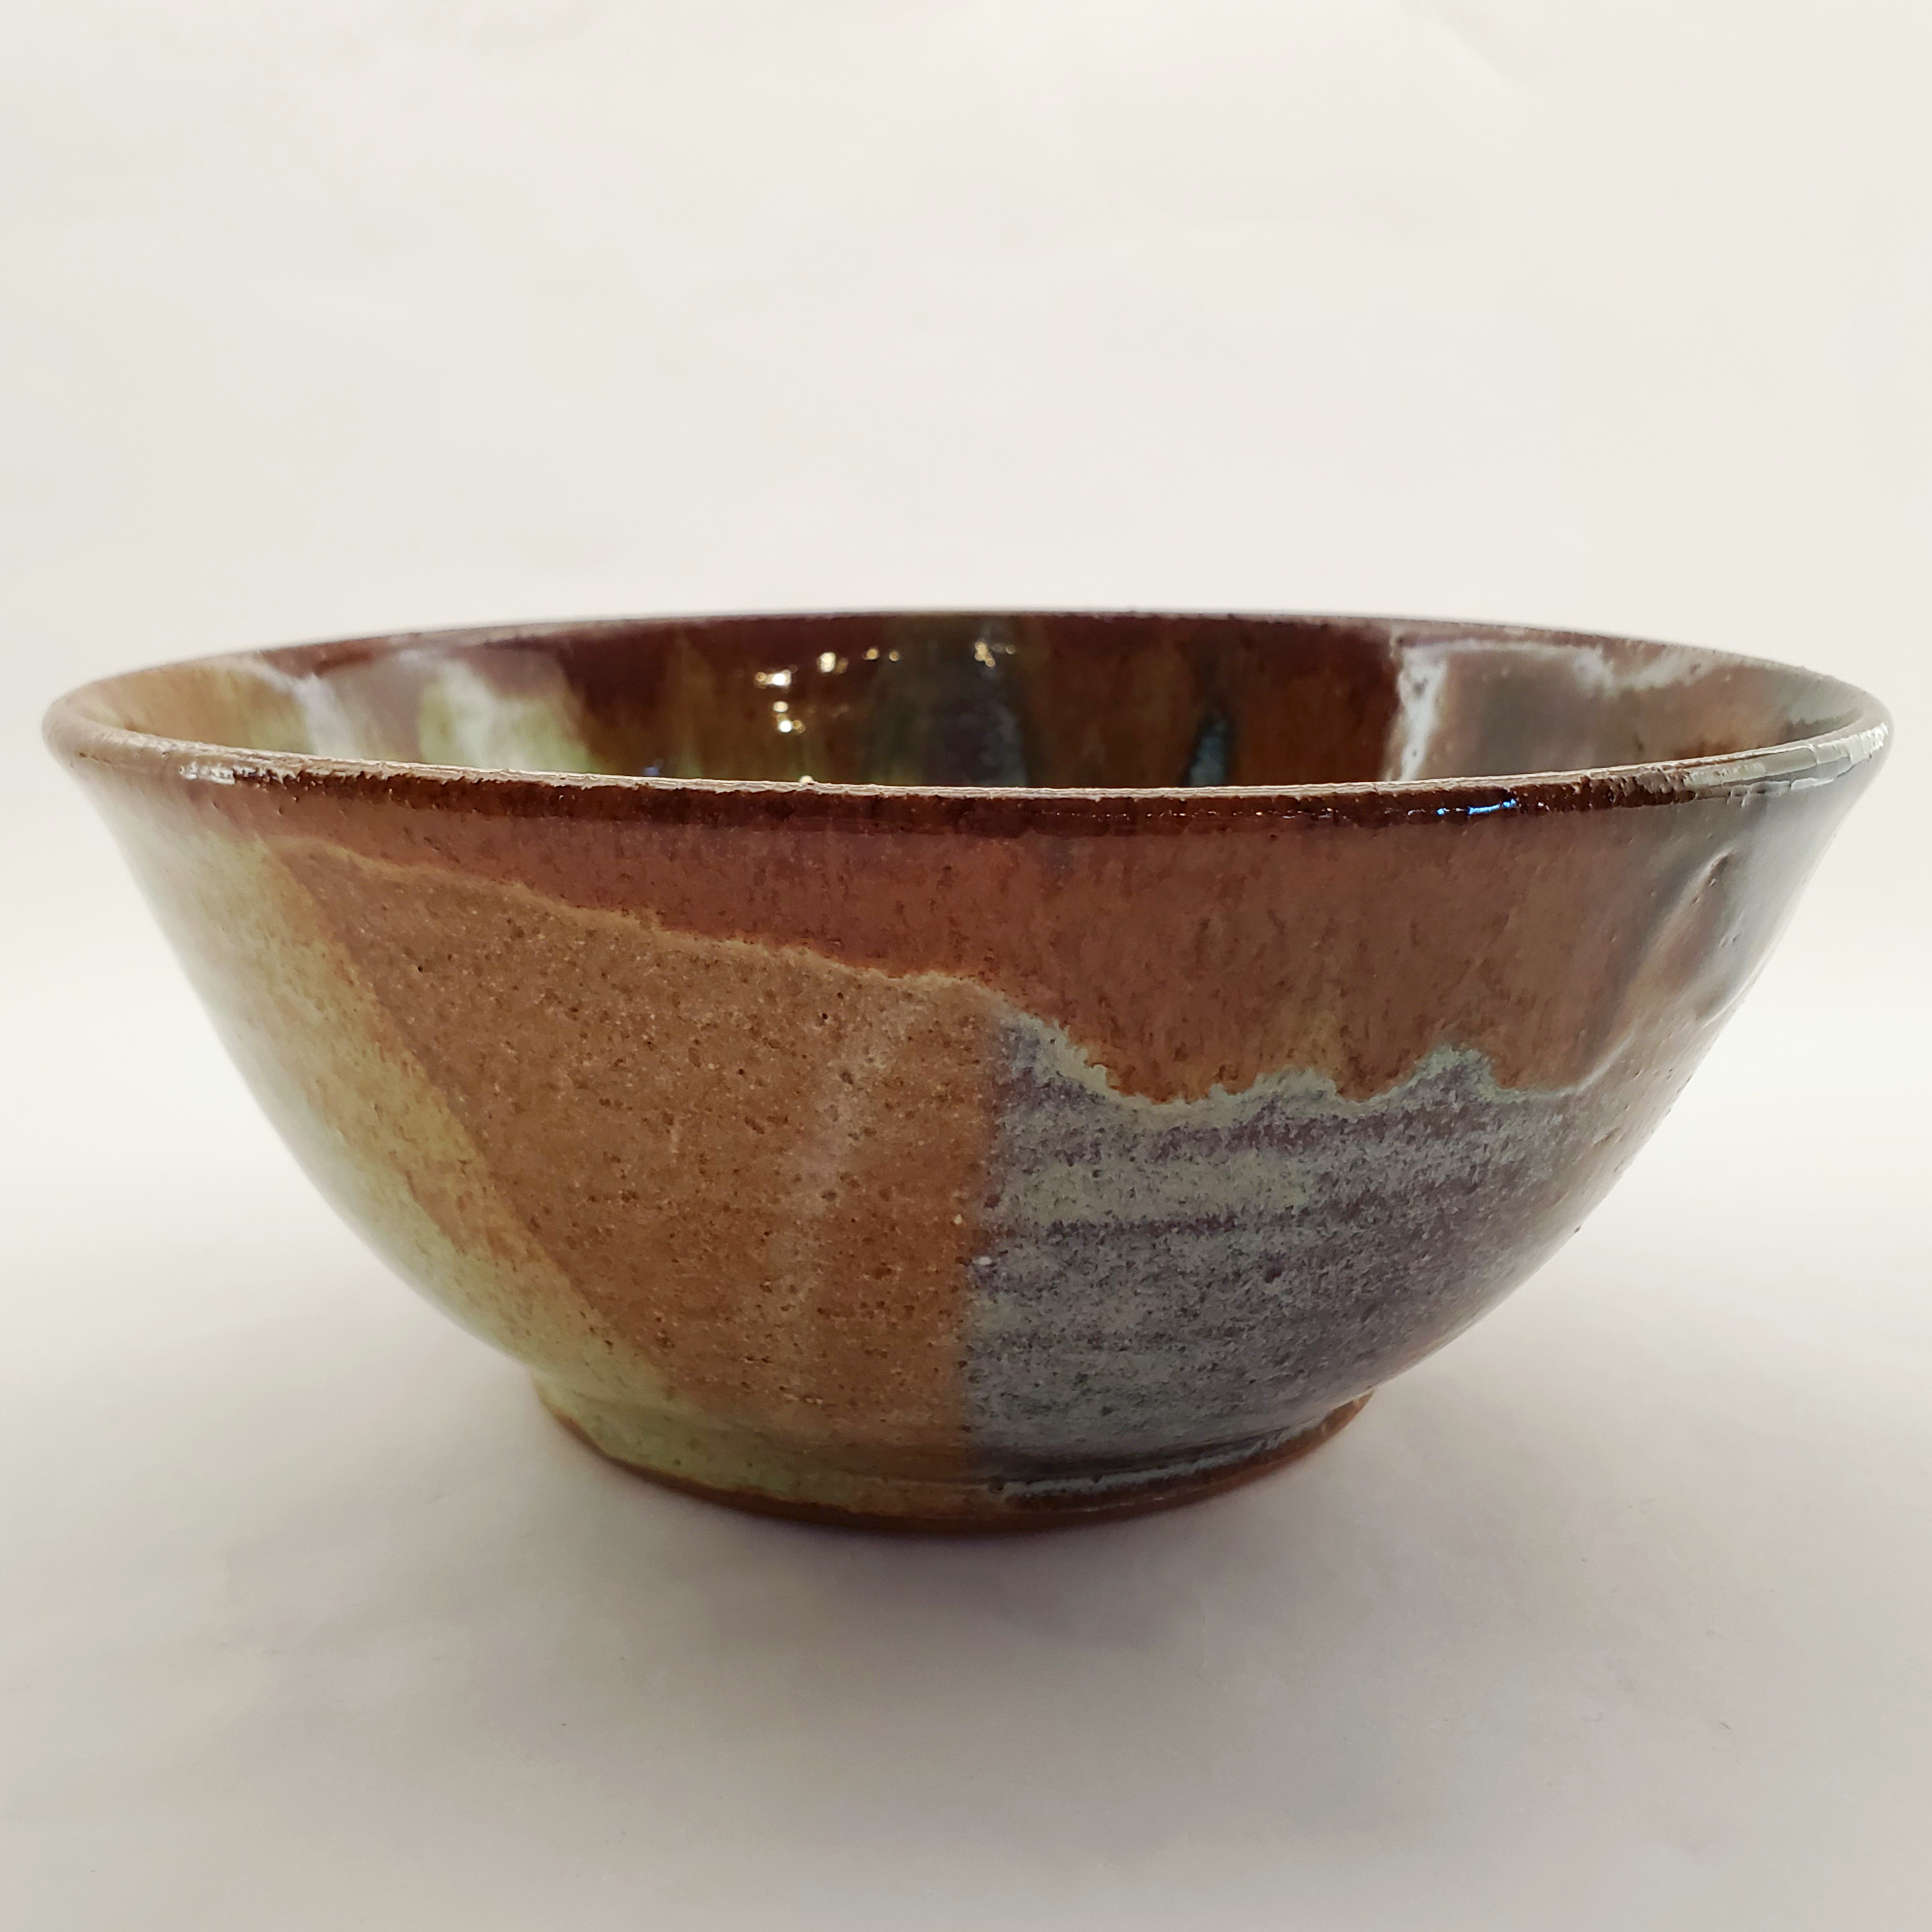 Beautiful Feathered style bowl glazed in greens and browns. Handmade on Vashon Island by Abraham McBride Pottery. Local ceramics artist, Seattle Washington. Small business, Made in the USA. 